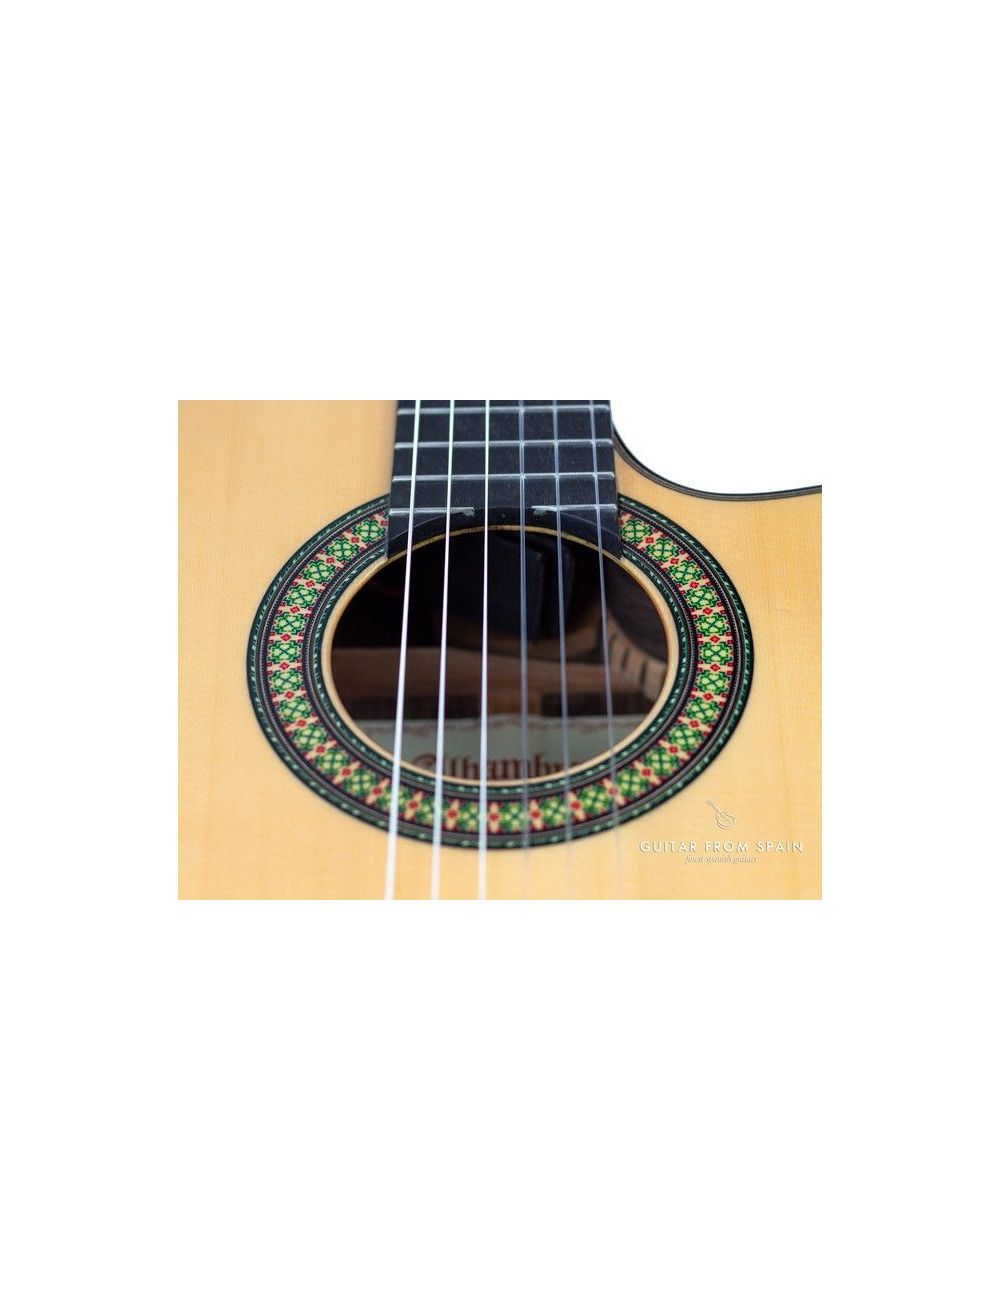 Alhambra 7PACW E8 Electro Classical Guitar 7PACWE8 Electro-Classical